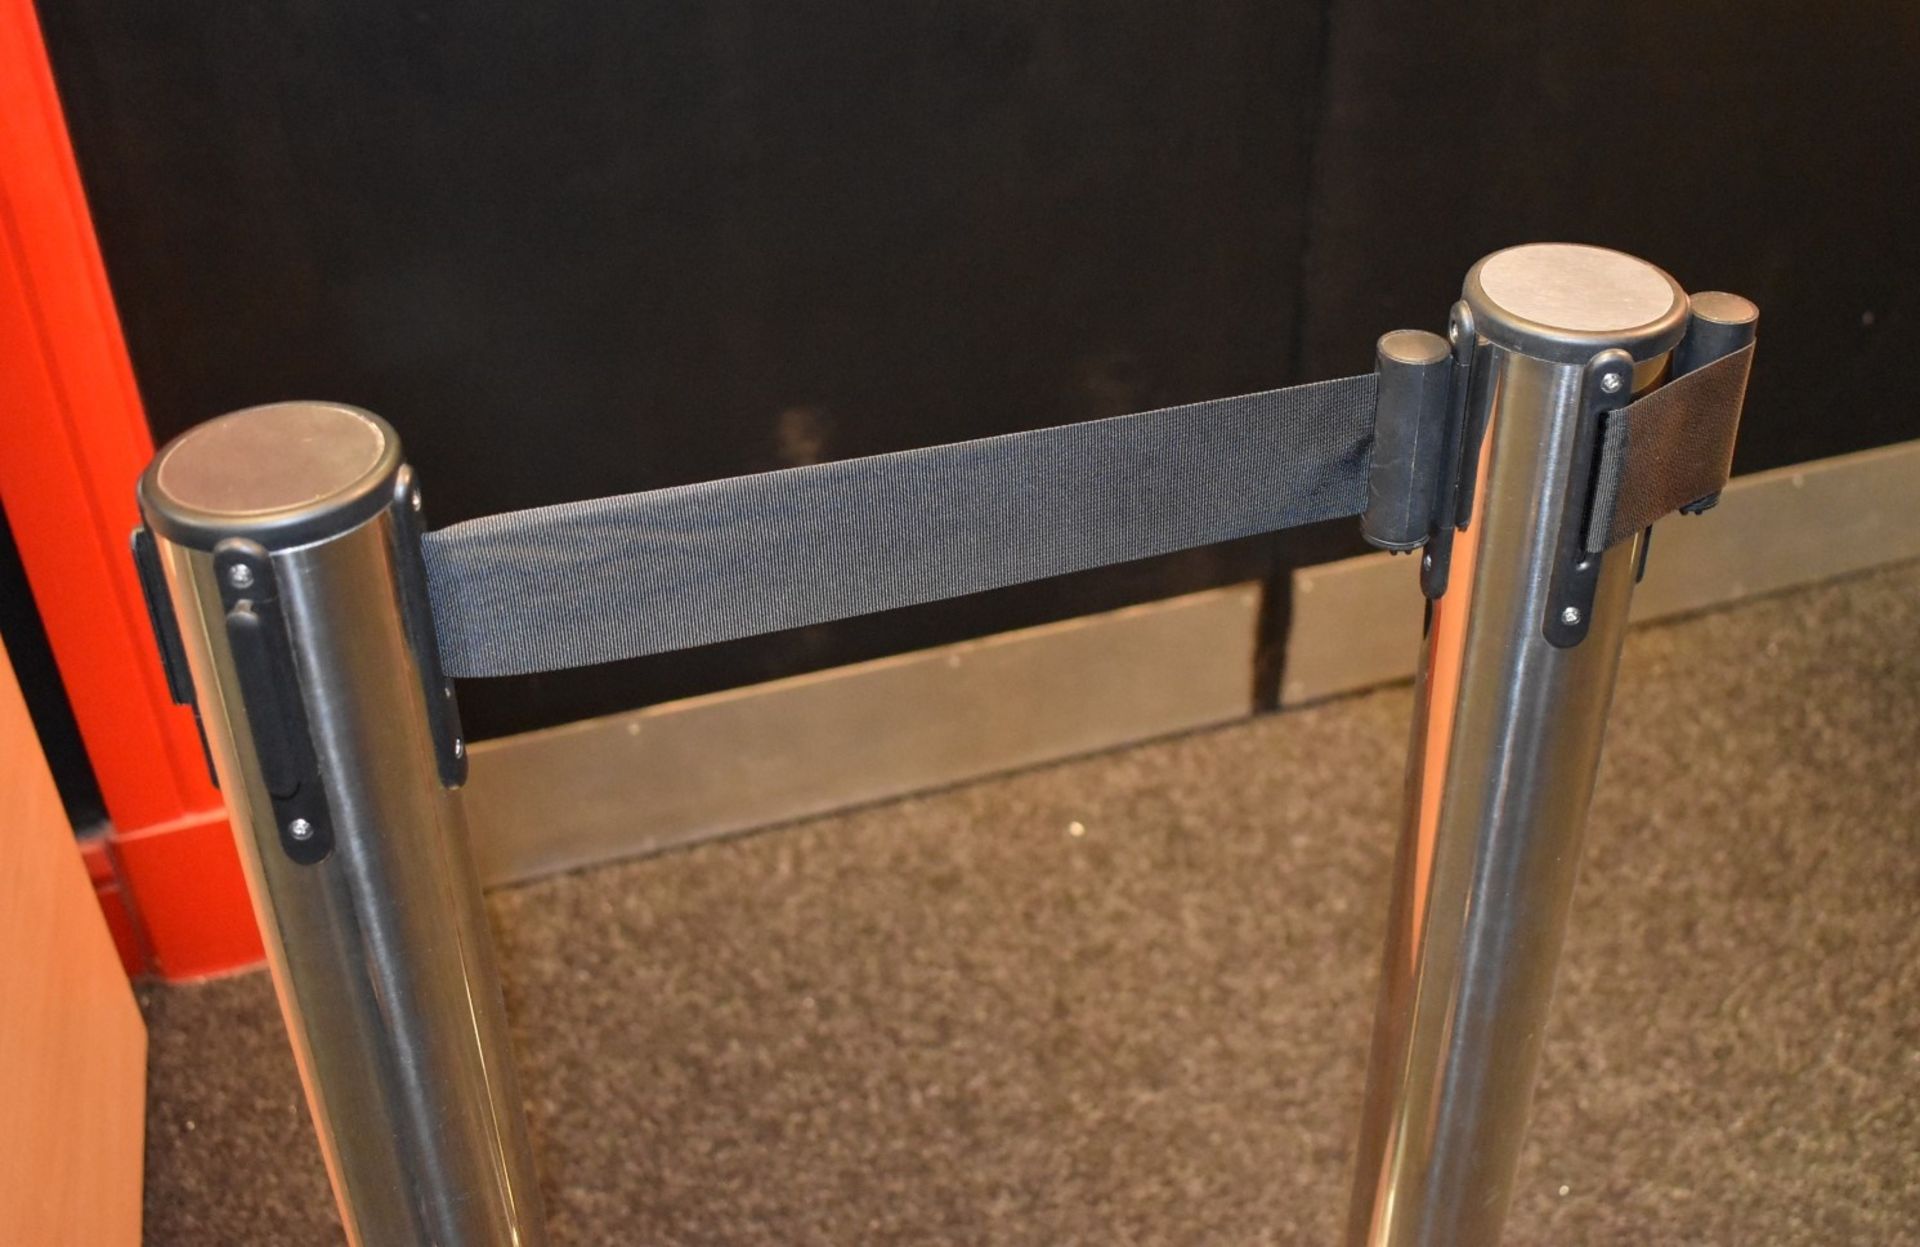 2 x Crowd Control Queue Barriers With Rectractable Belts - Chrome Finish - Approx Height 95 cms - - Image 3 of 3